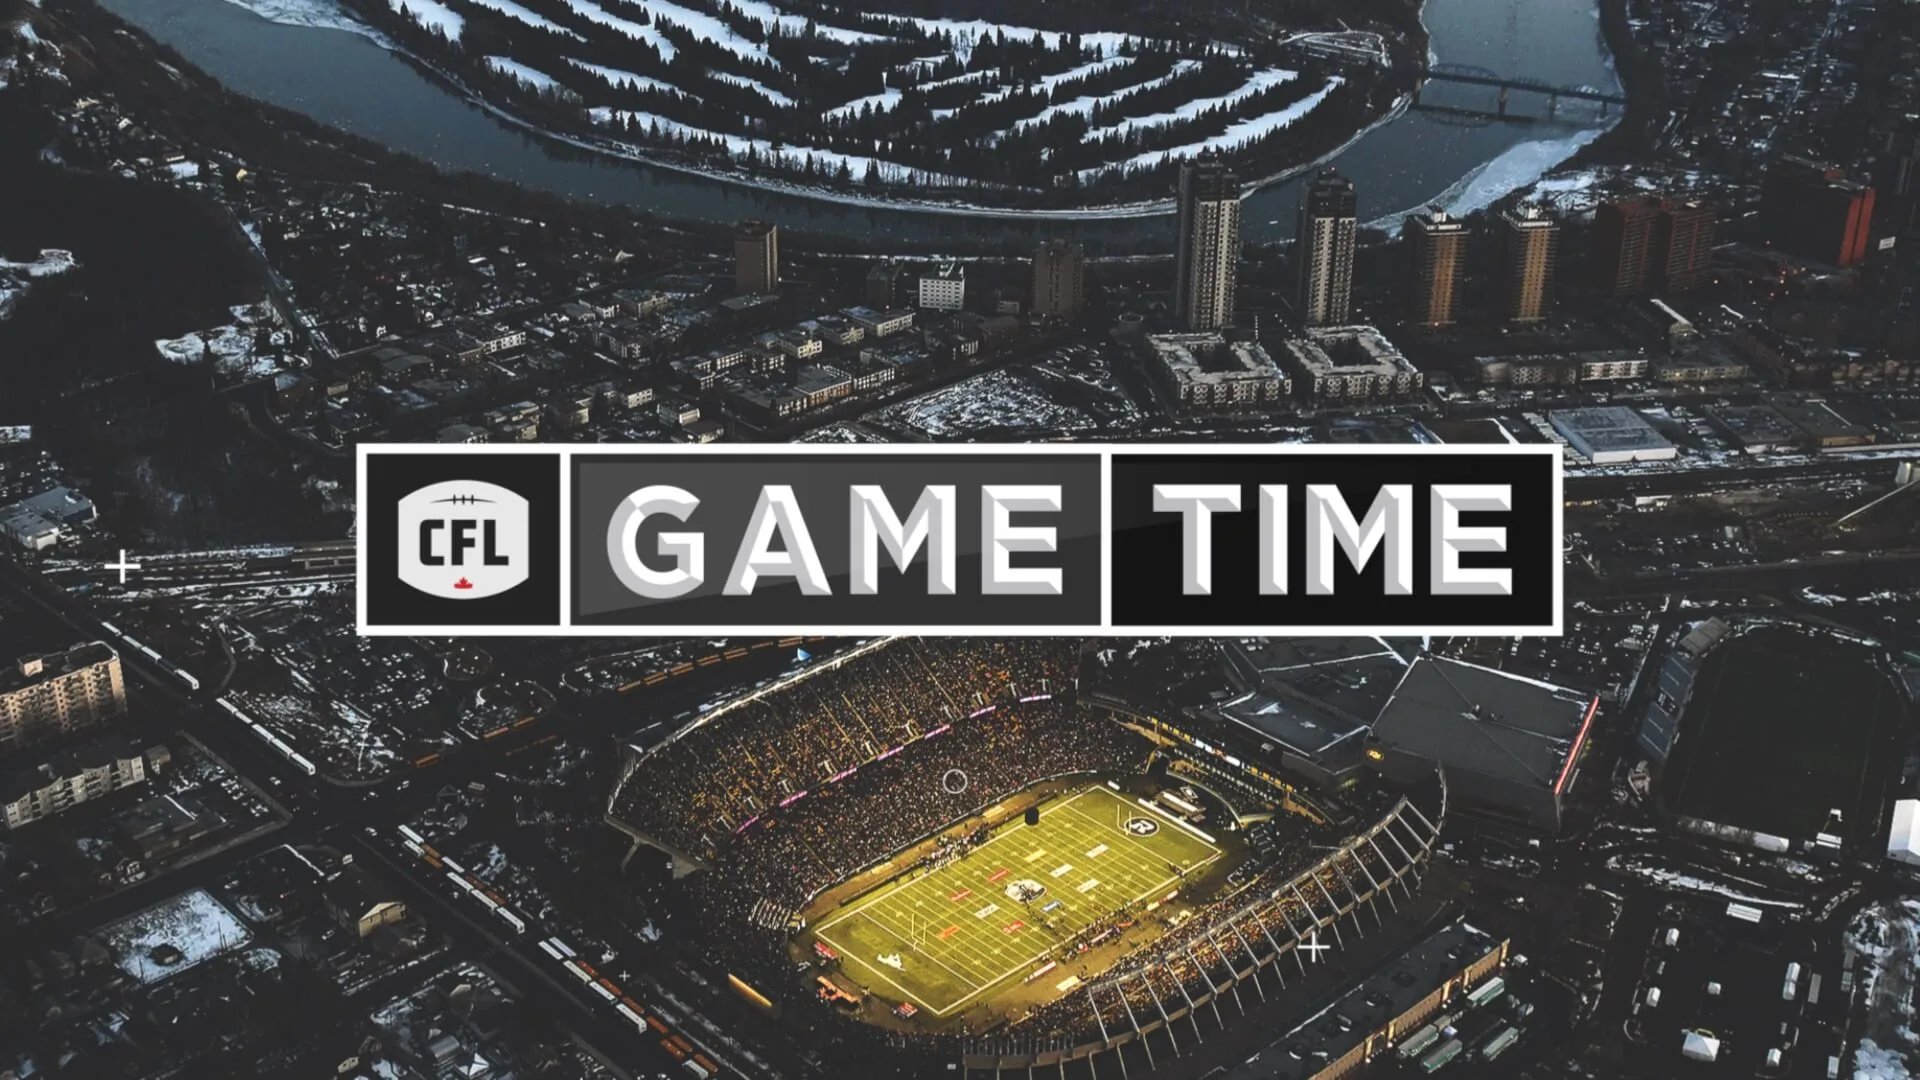 cfl-game-time-2